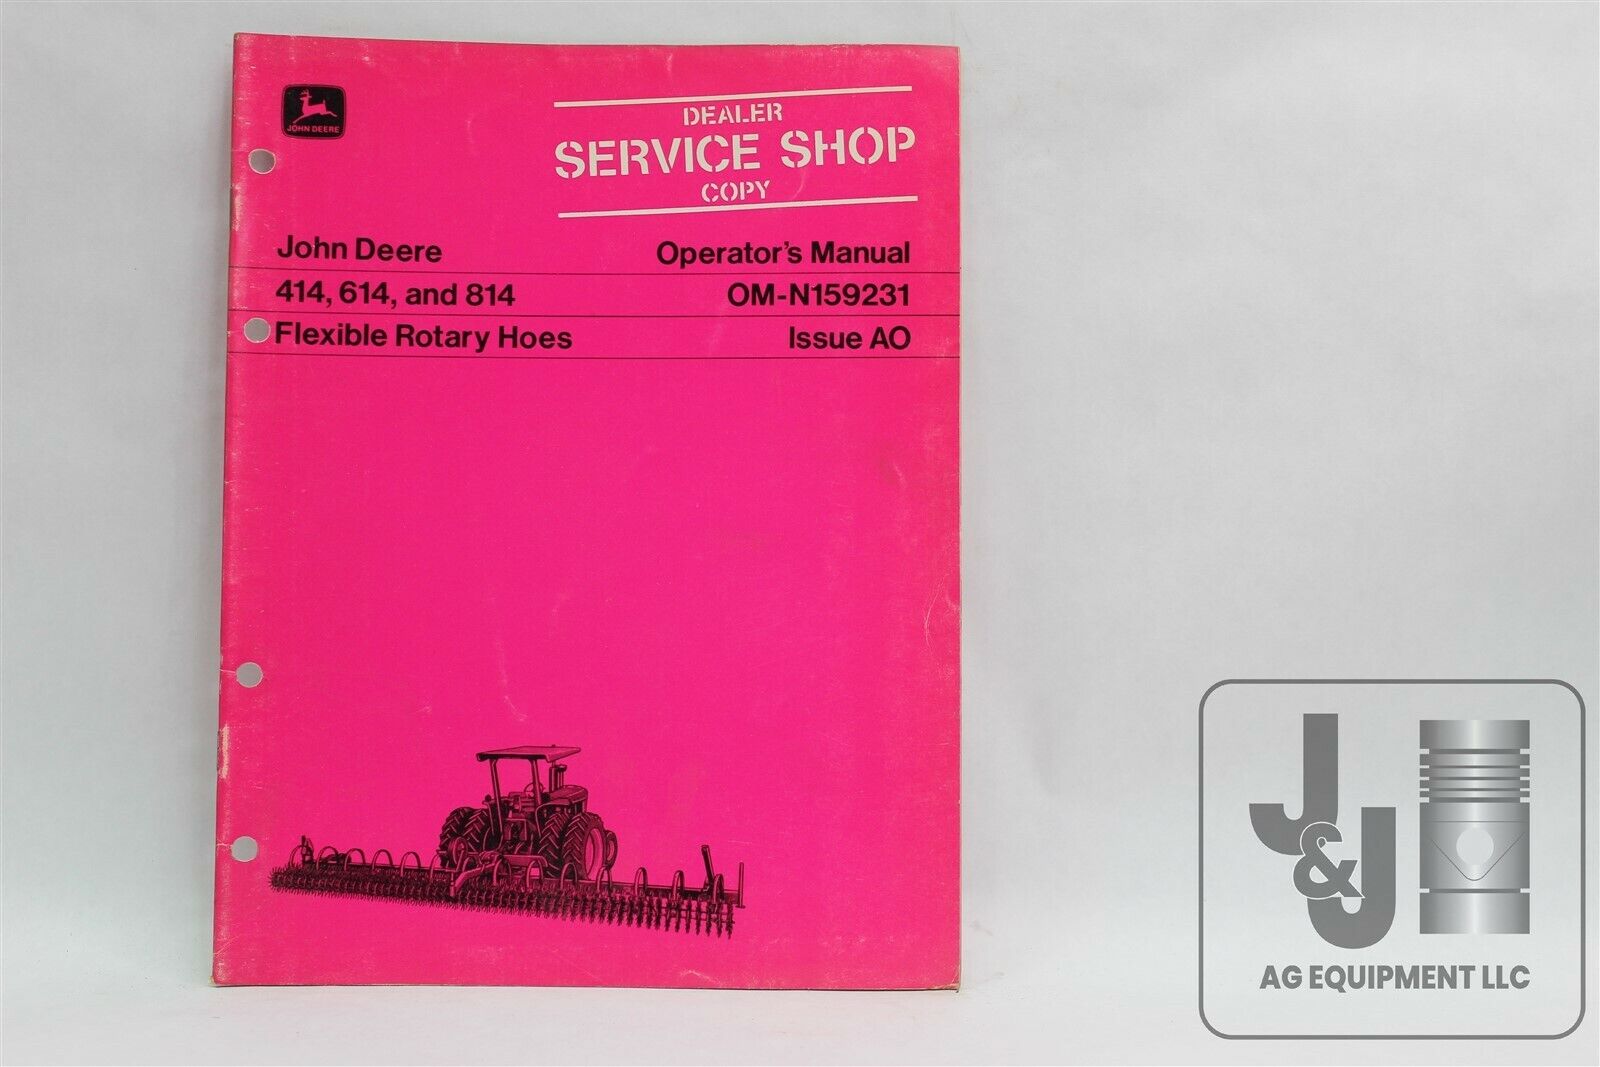 JOHN DEERE 414, 614, and 814 FLEXIBLE ROTARY HOES OPERATOR'S MANUAL DEALER COPY